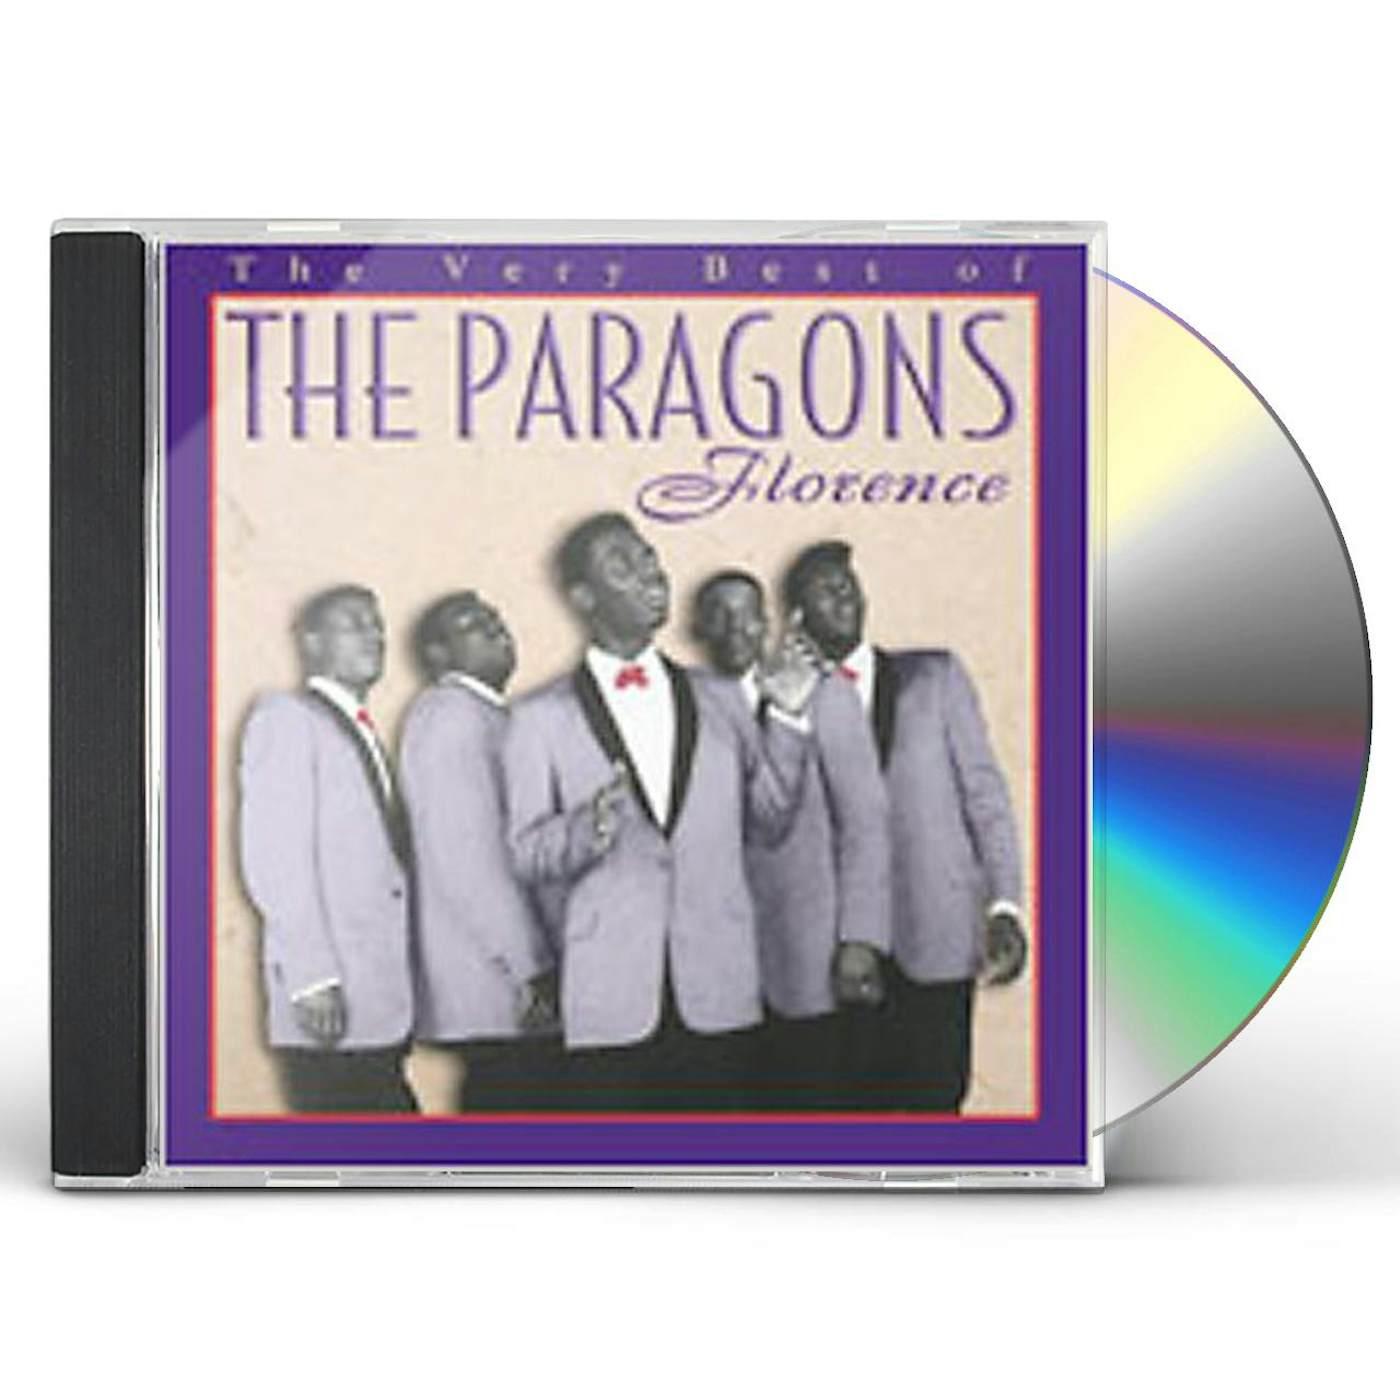 VERY BEST OF The Paragons-FLORENCE CD